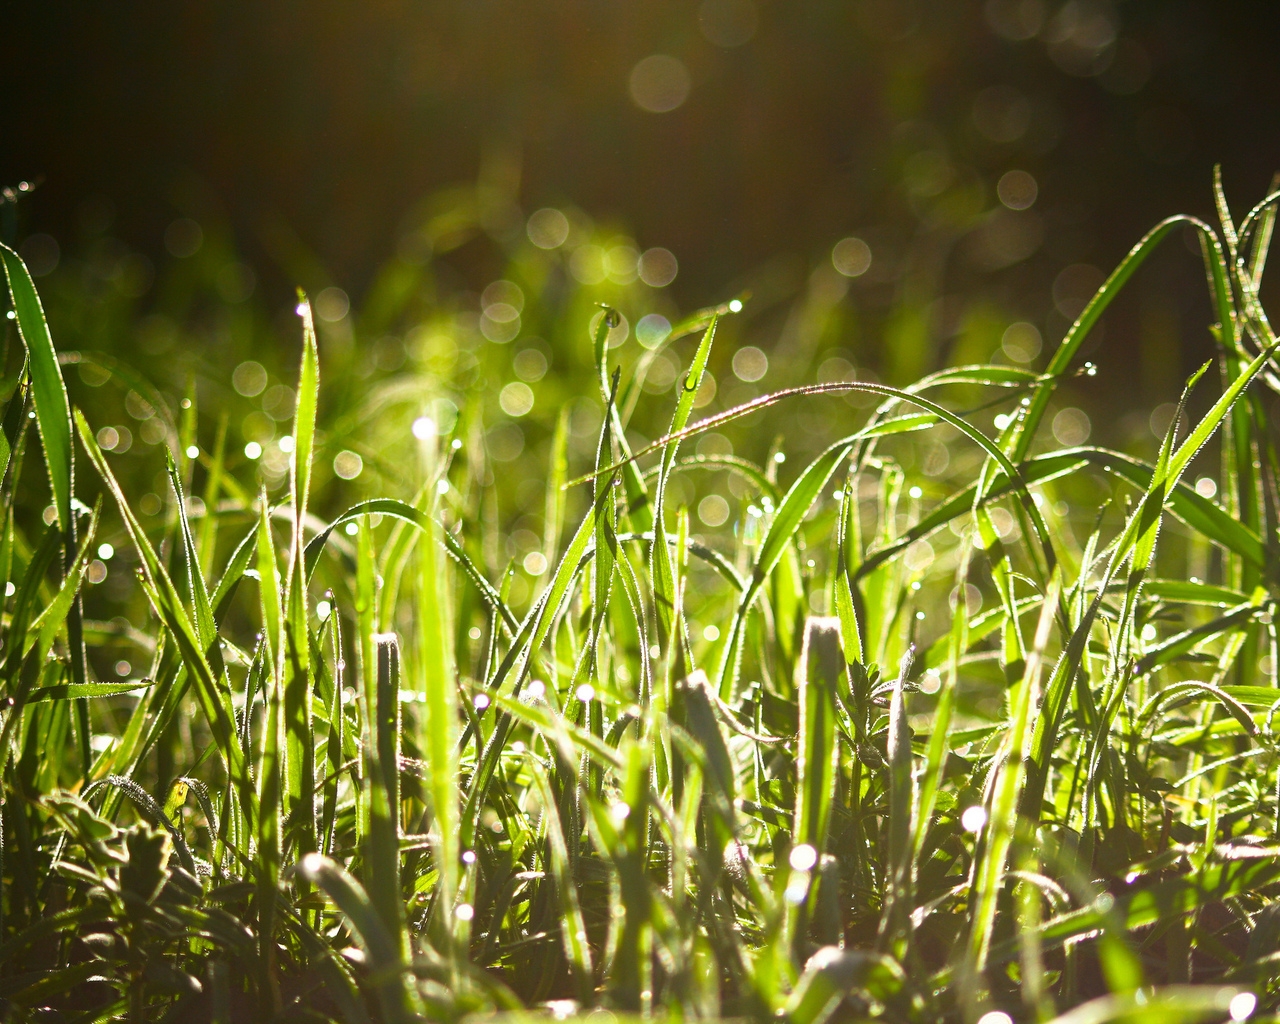 Wet Grass In The Sun  for 1280 x 1024 resolution